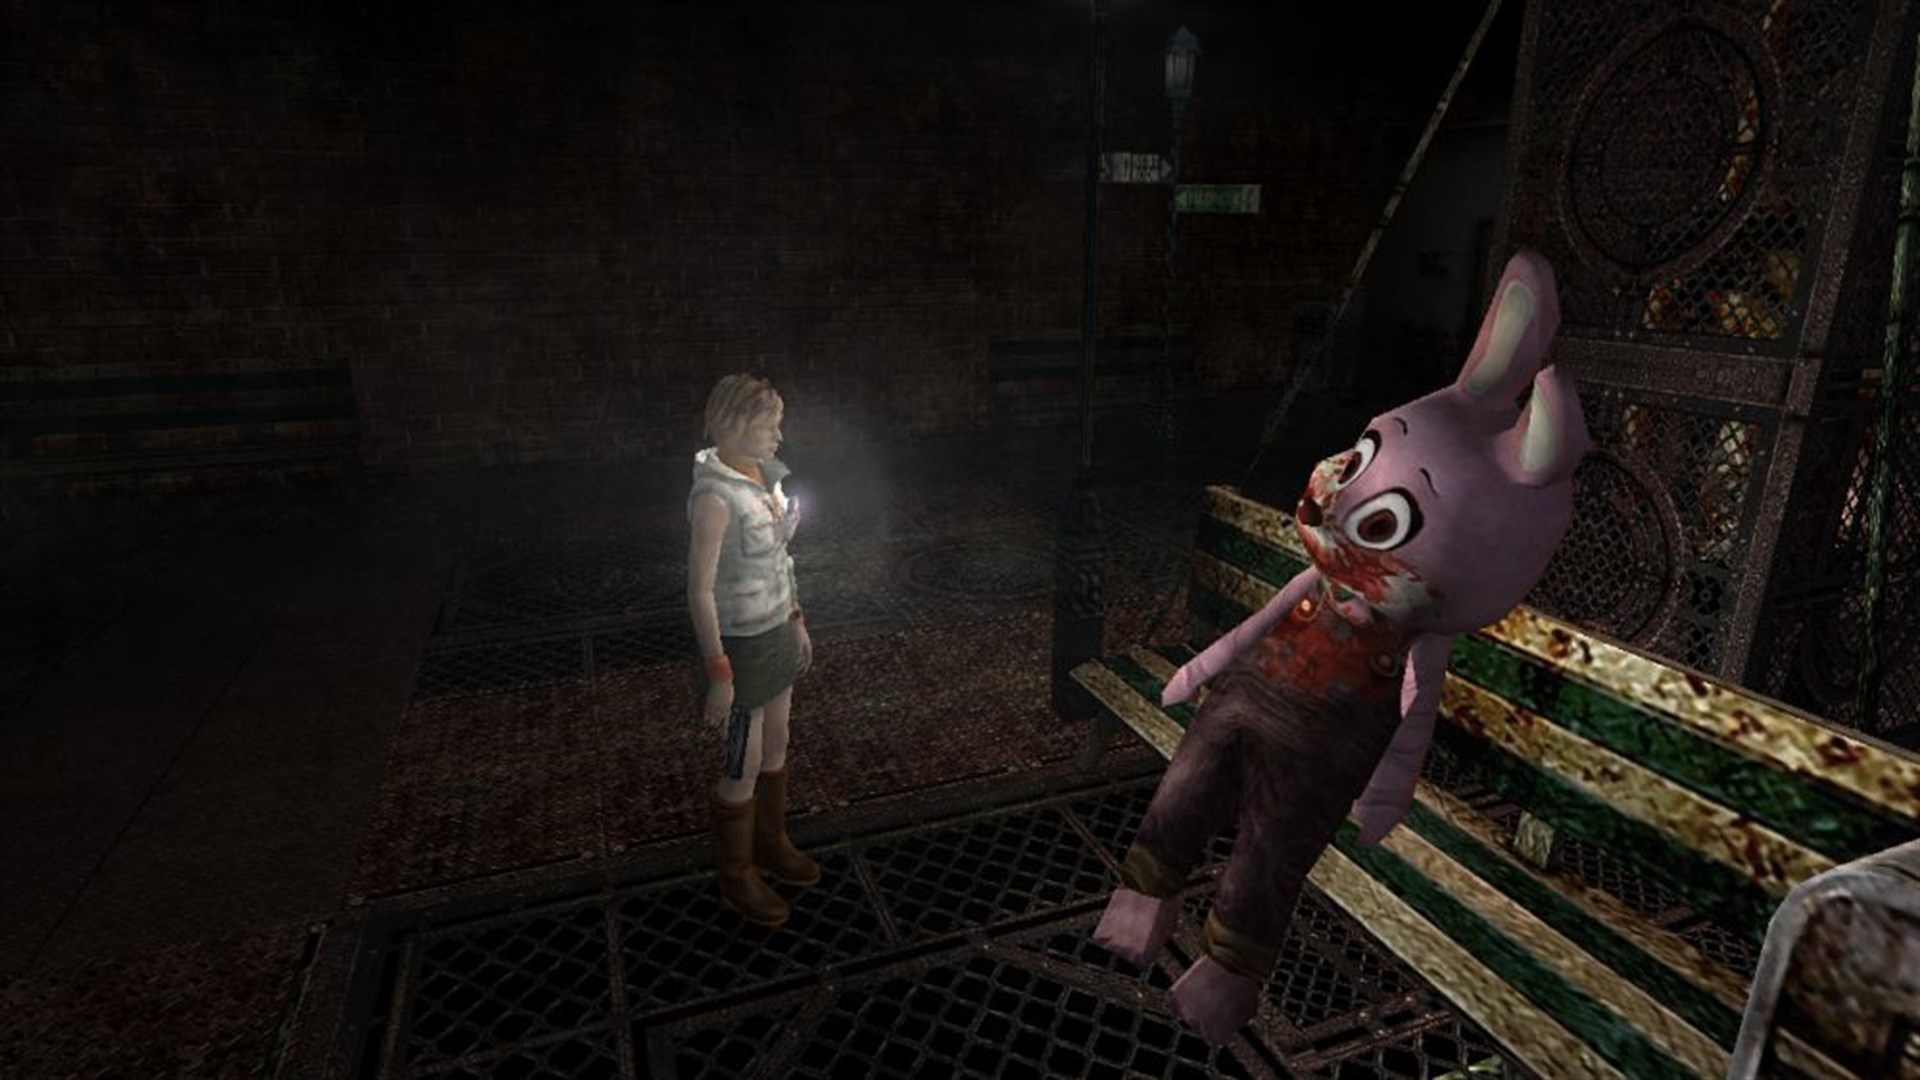 Buy Silent Hill: HD Collection